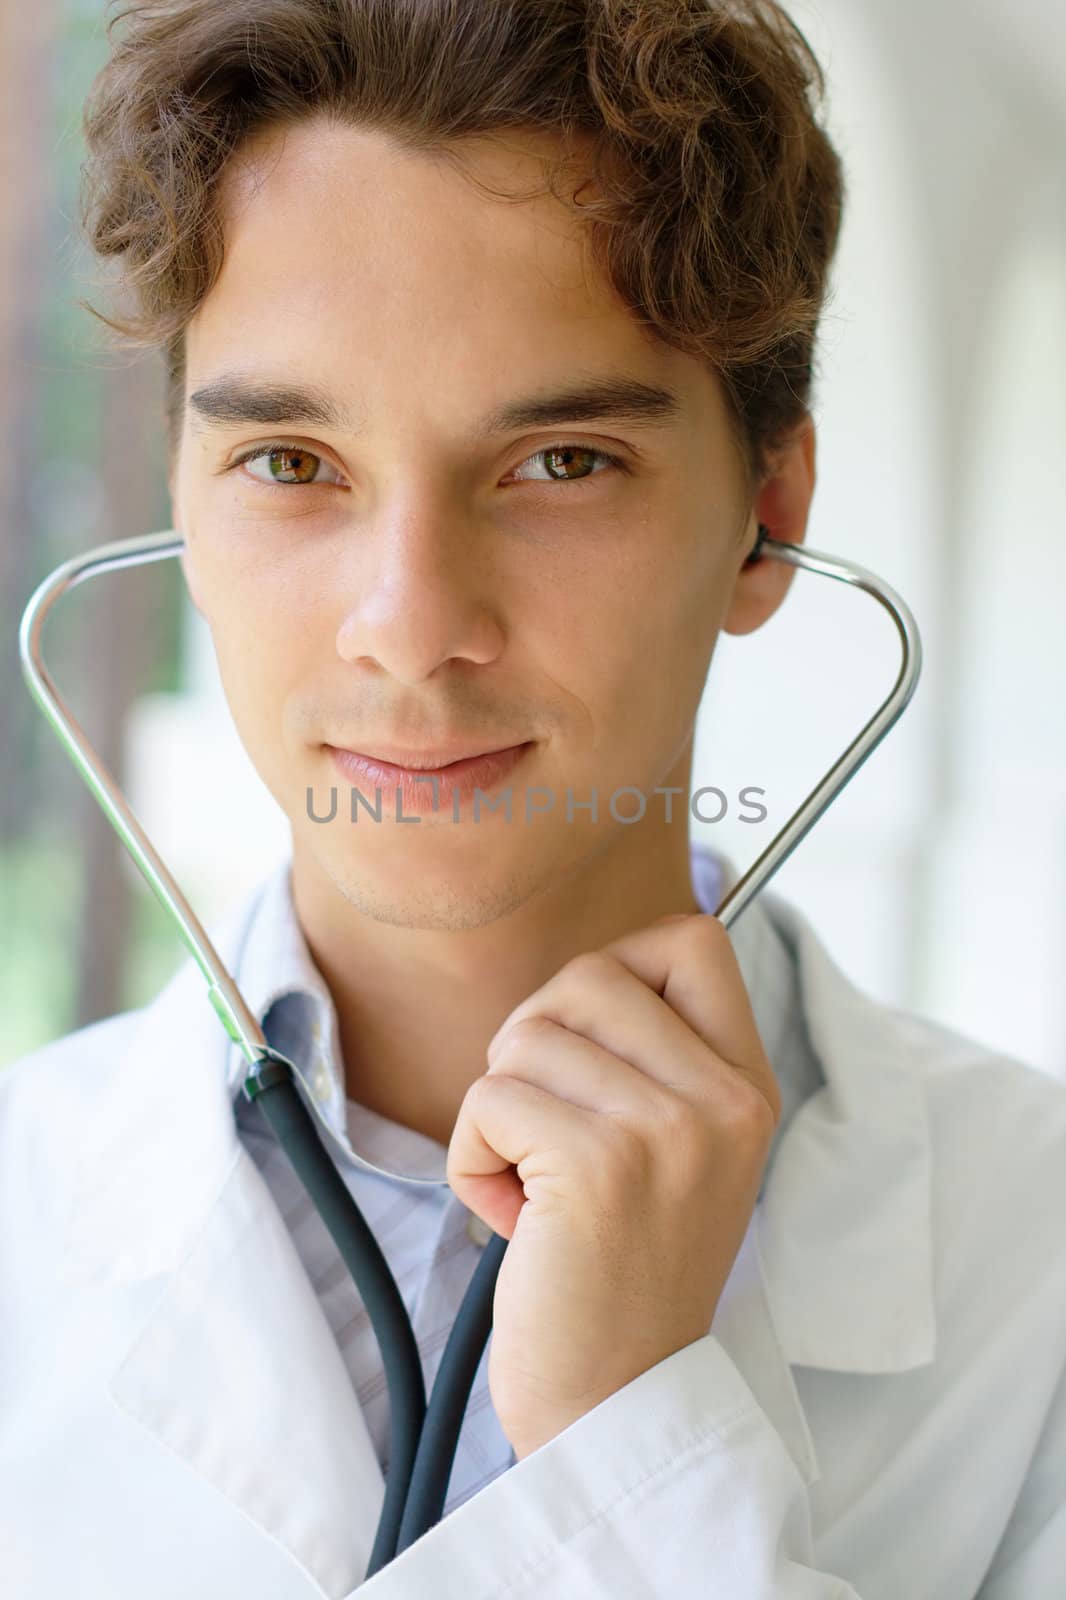 Close-up portrait of a smiling young doctor